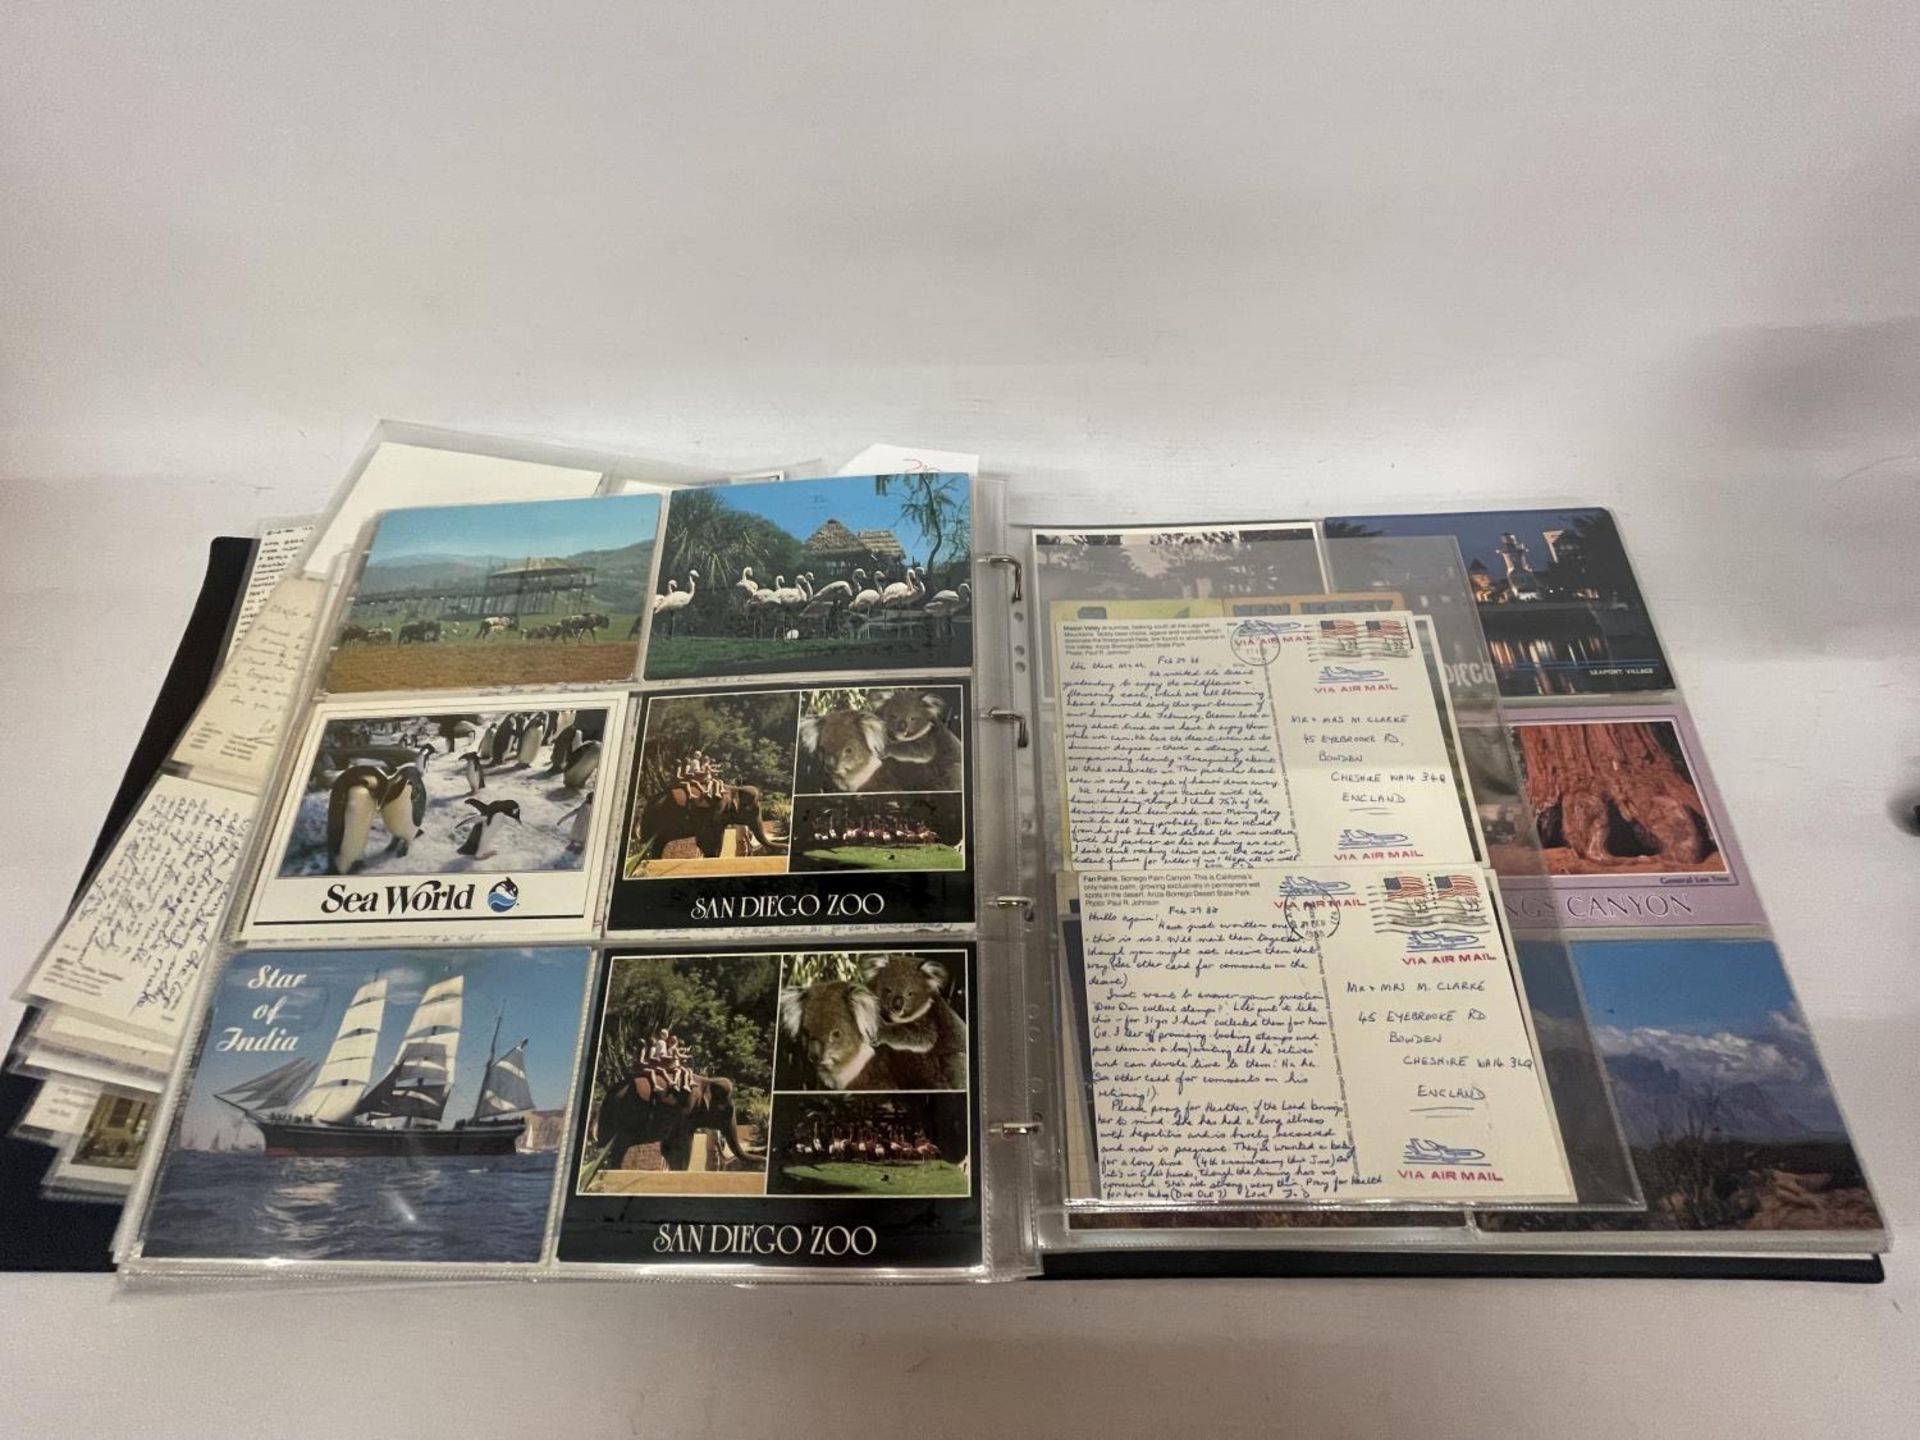 APPROXIMATLEY 330 POSTCARDS RELATING TO EUROPE, ASIA, AUSTRALIA, NEW ZEALAND, CANADA AND USA IN A - Image 7 of 11